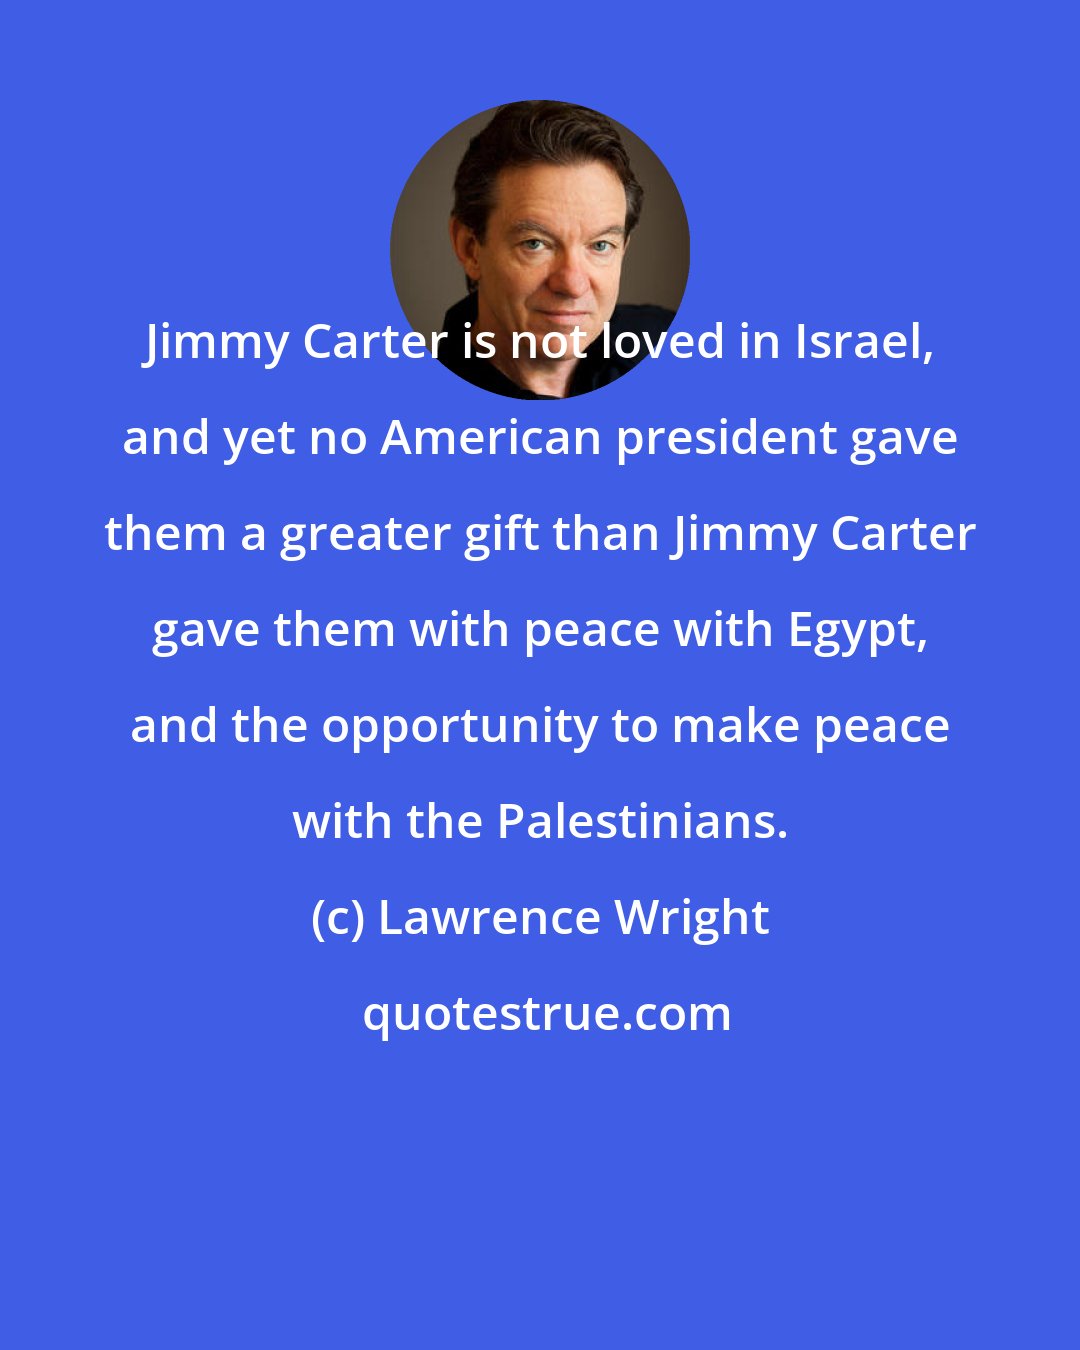 Lawrence Wright: Jimmy Carter is not loved in Israel, and yet no American president gave them a greater gift than Jimmy Carter gave them with peace with Egypt, and the opportunity to make peace with the Palestinians.